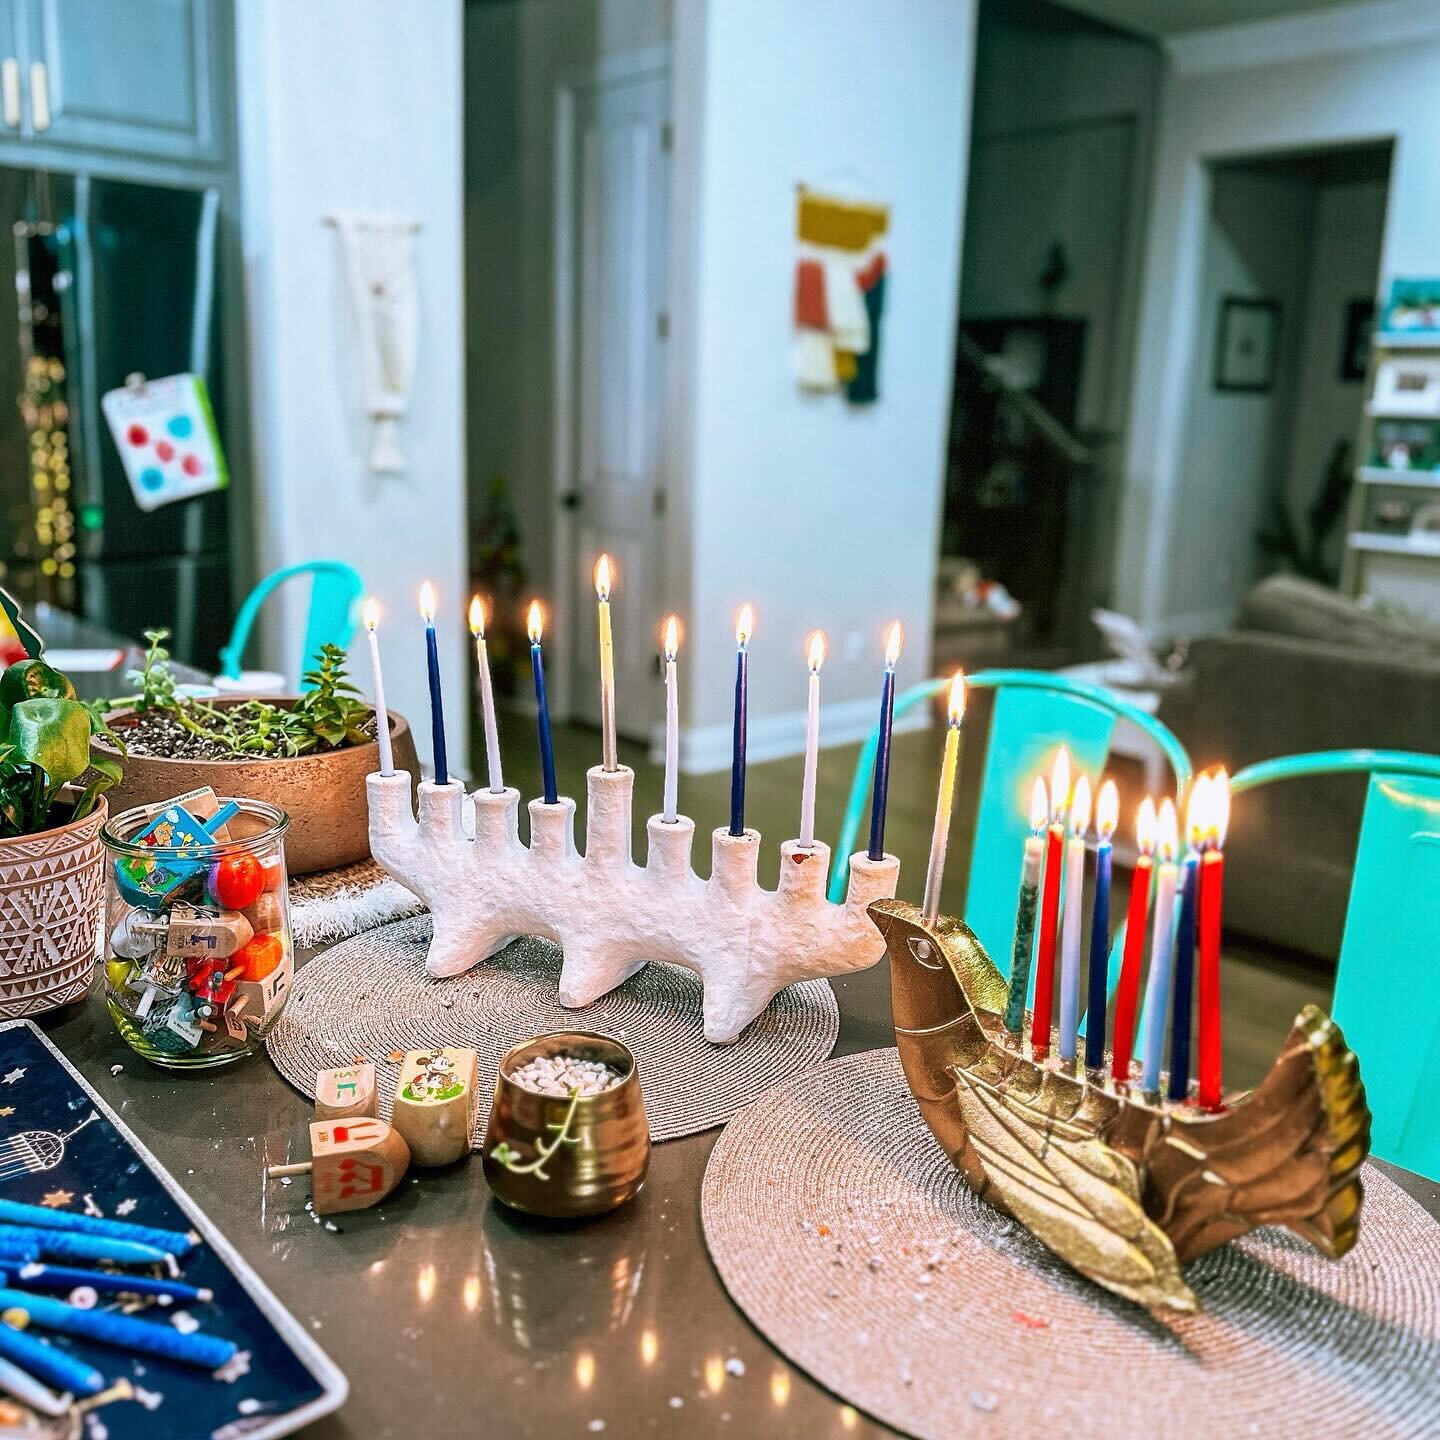 Tonight we celebrated the last night of Hanukkah! It&rsquo;s been 8 crazy but wonderful nights. Swipe to the end to see the last flames burning out. 🕎 Thank you for letting me share our holiday with you. In a time when being Jewish can be a bit scar